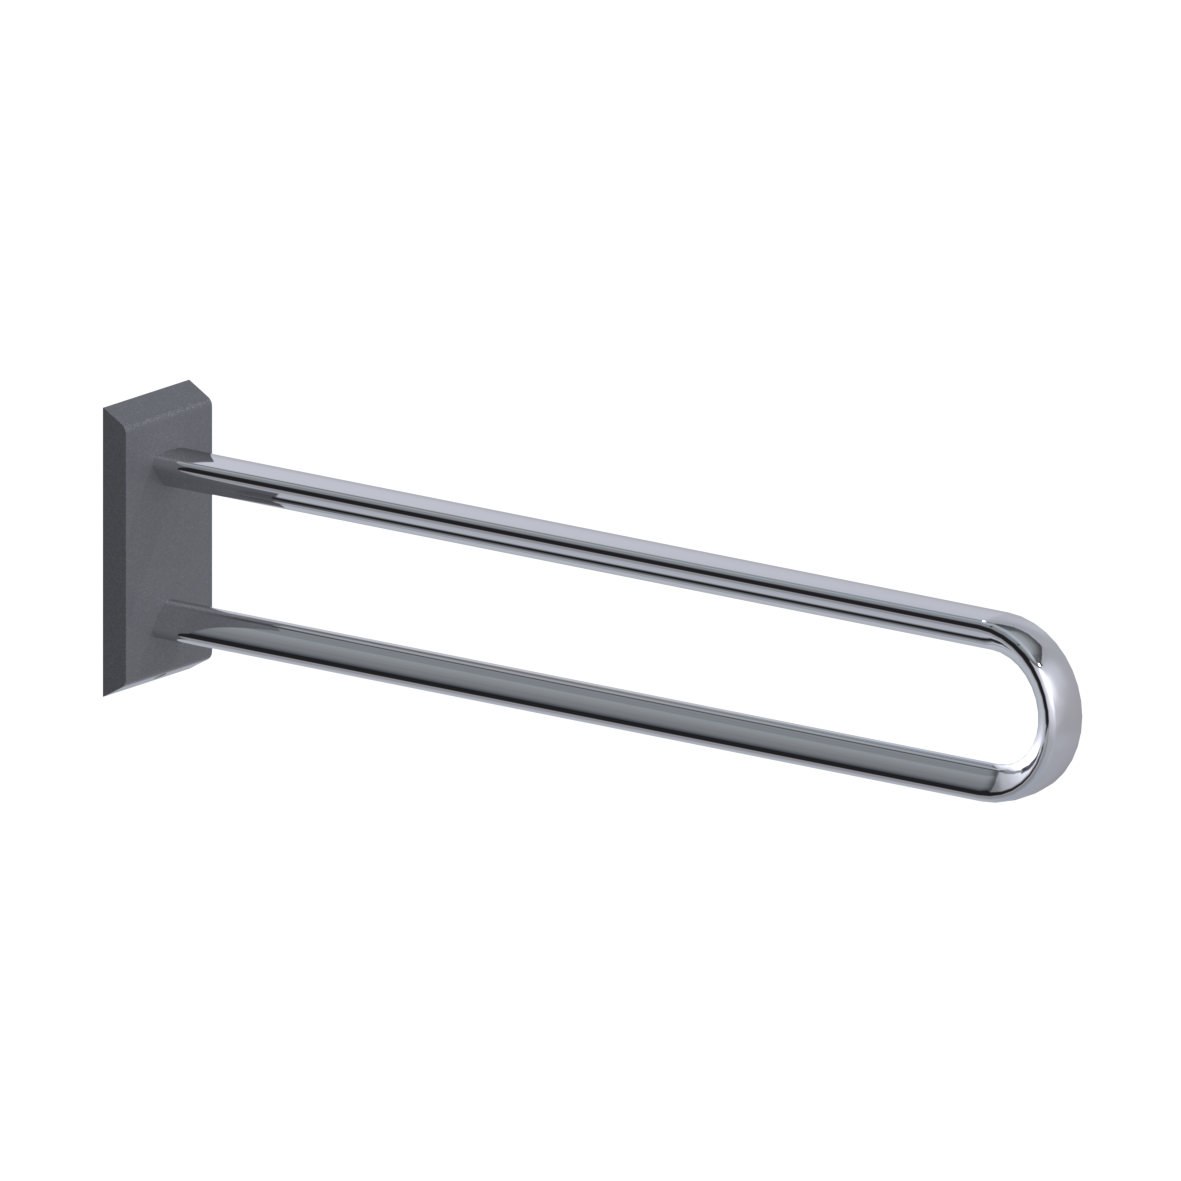 Cavere Care Chrome Wall support rail vario, with base plate, L = 850 mm, Chrome metallic anthracite